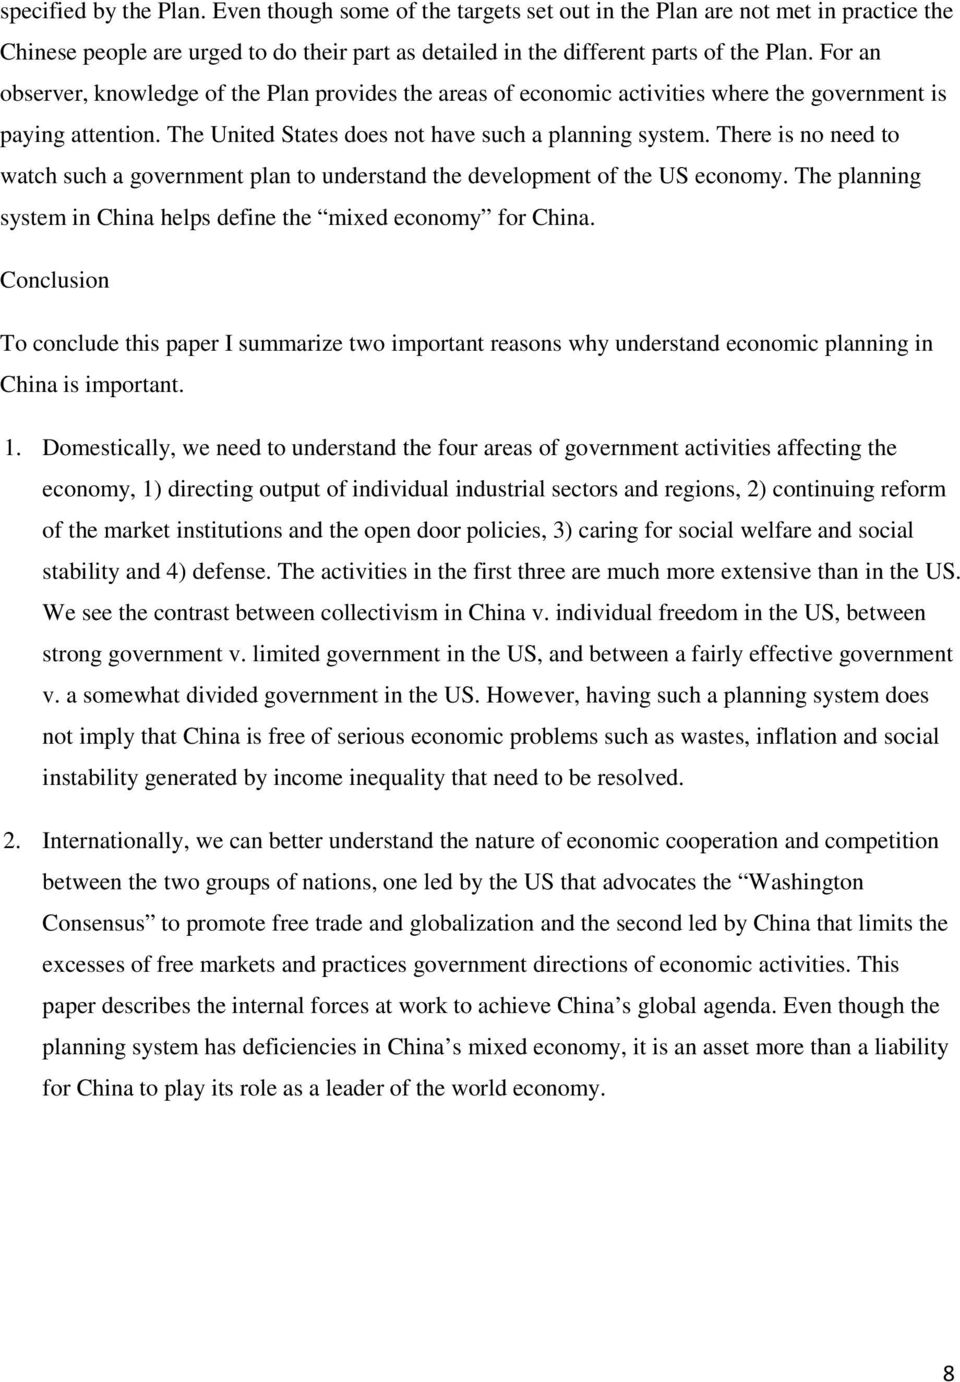 There is no need to watch such a government plan to understand the development of the US economy. The planning system in China helps define the mixed economy for China.